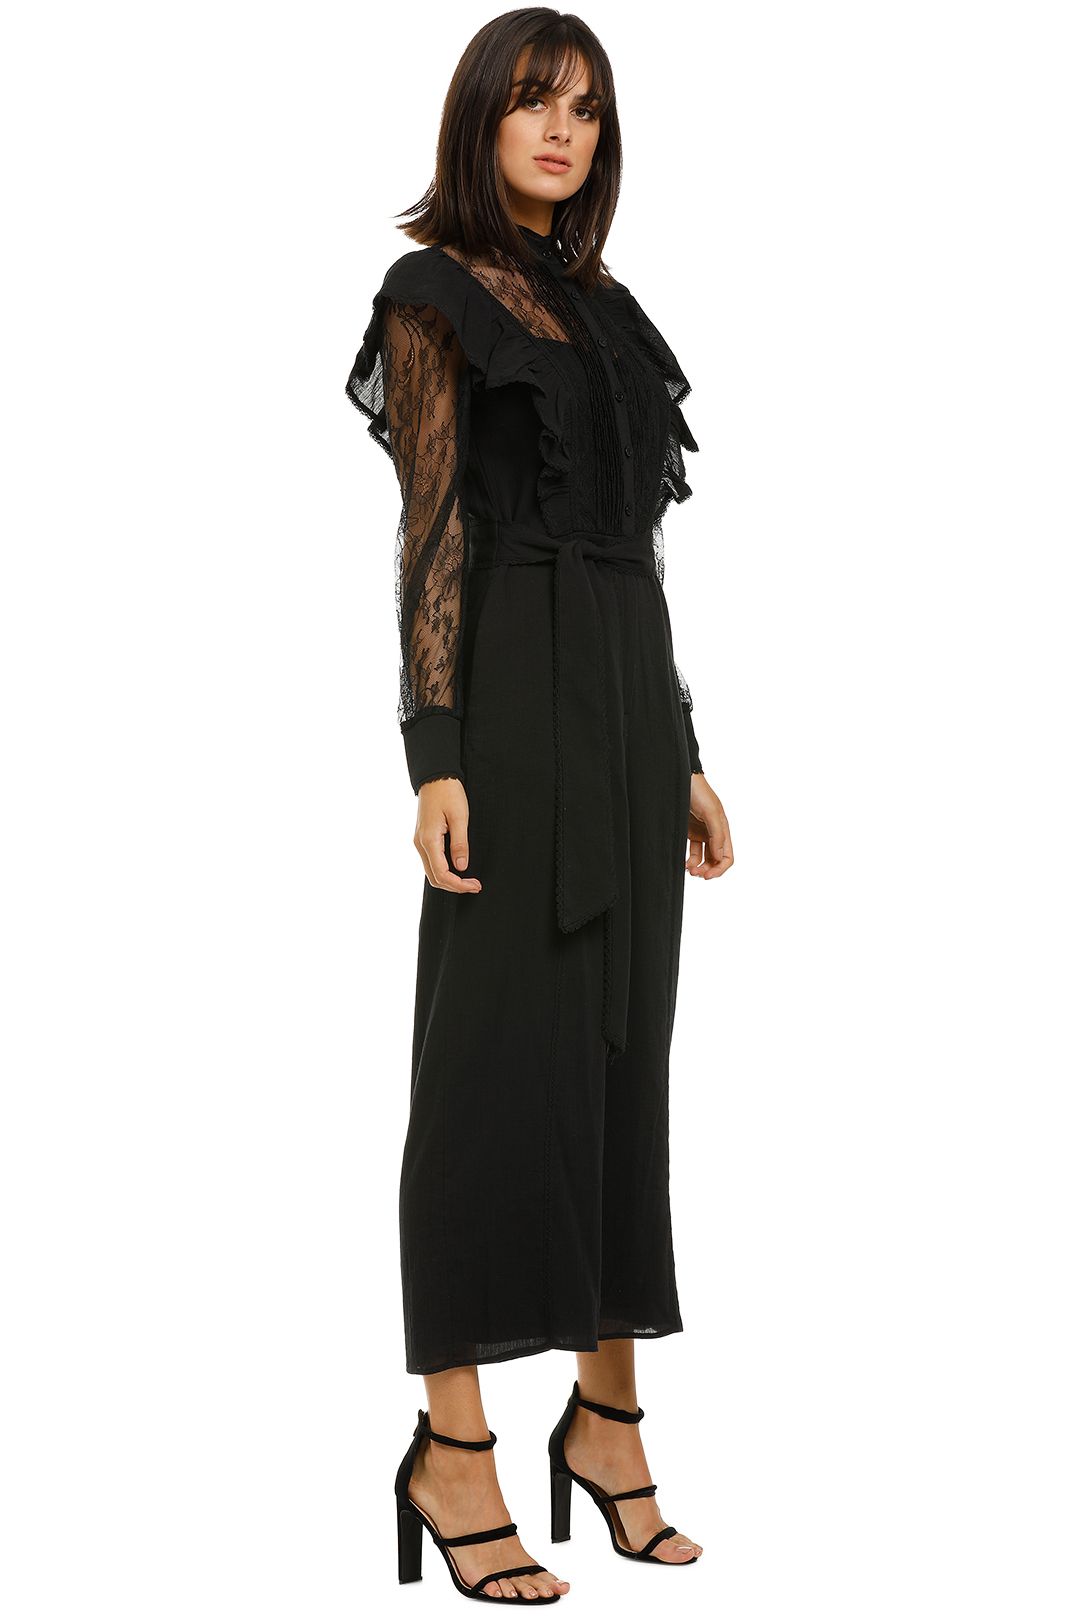 Whistles-Mixed-Lace-Frill-Jumpsuit-Black-Side